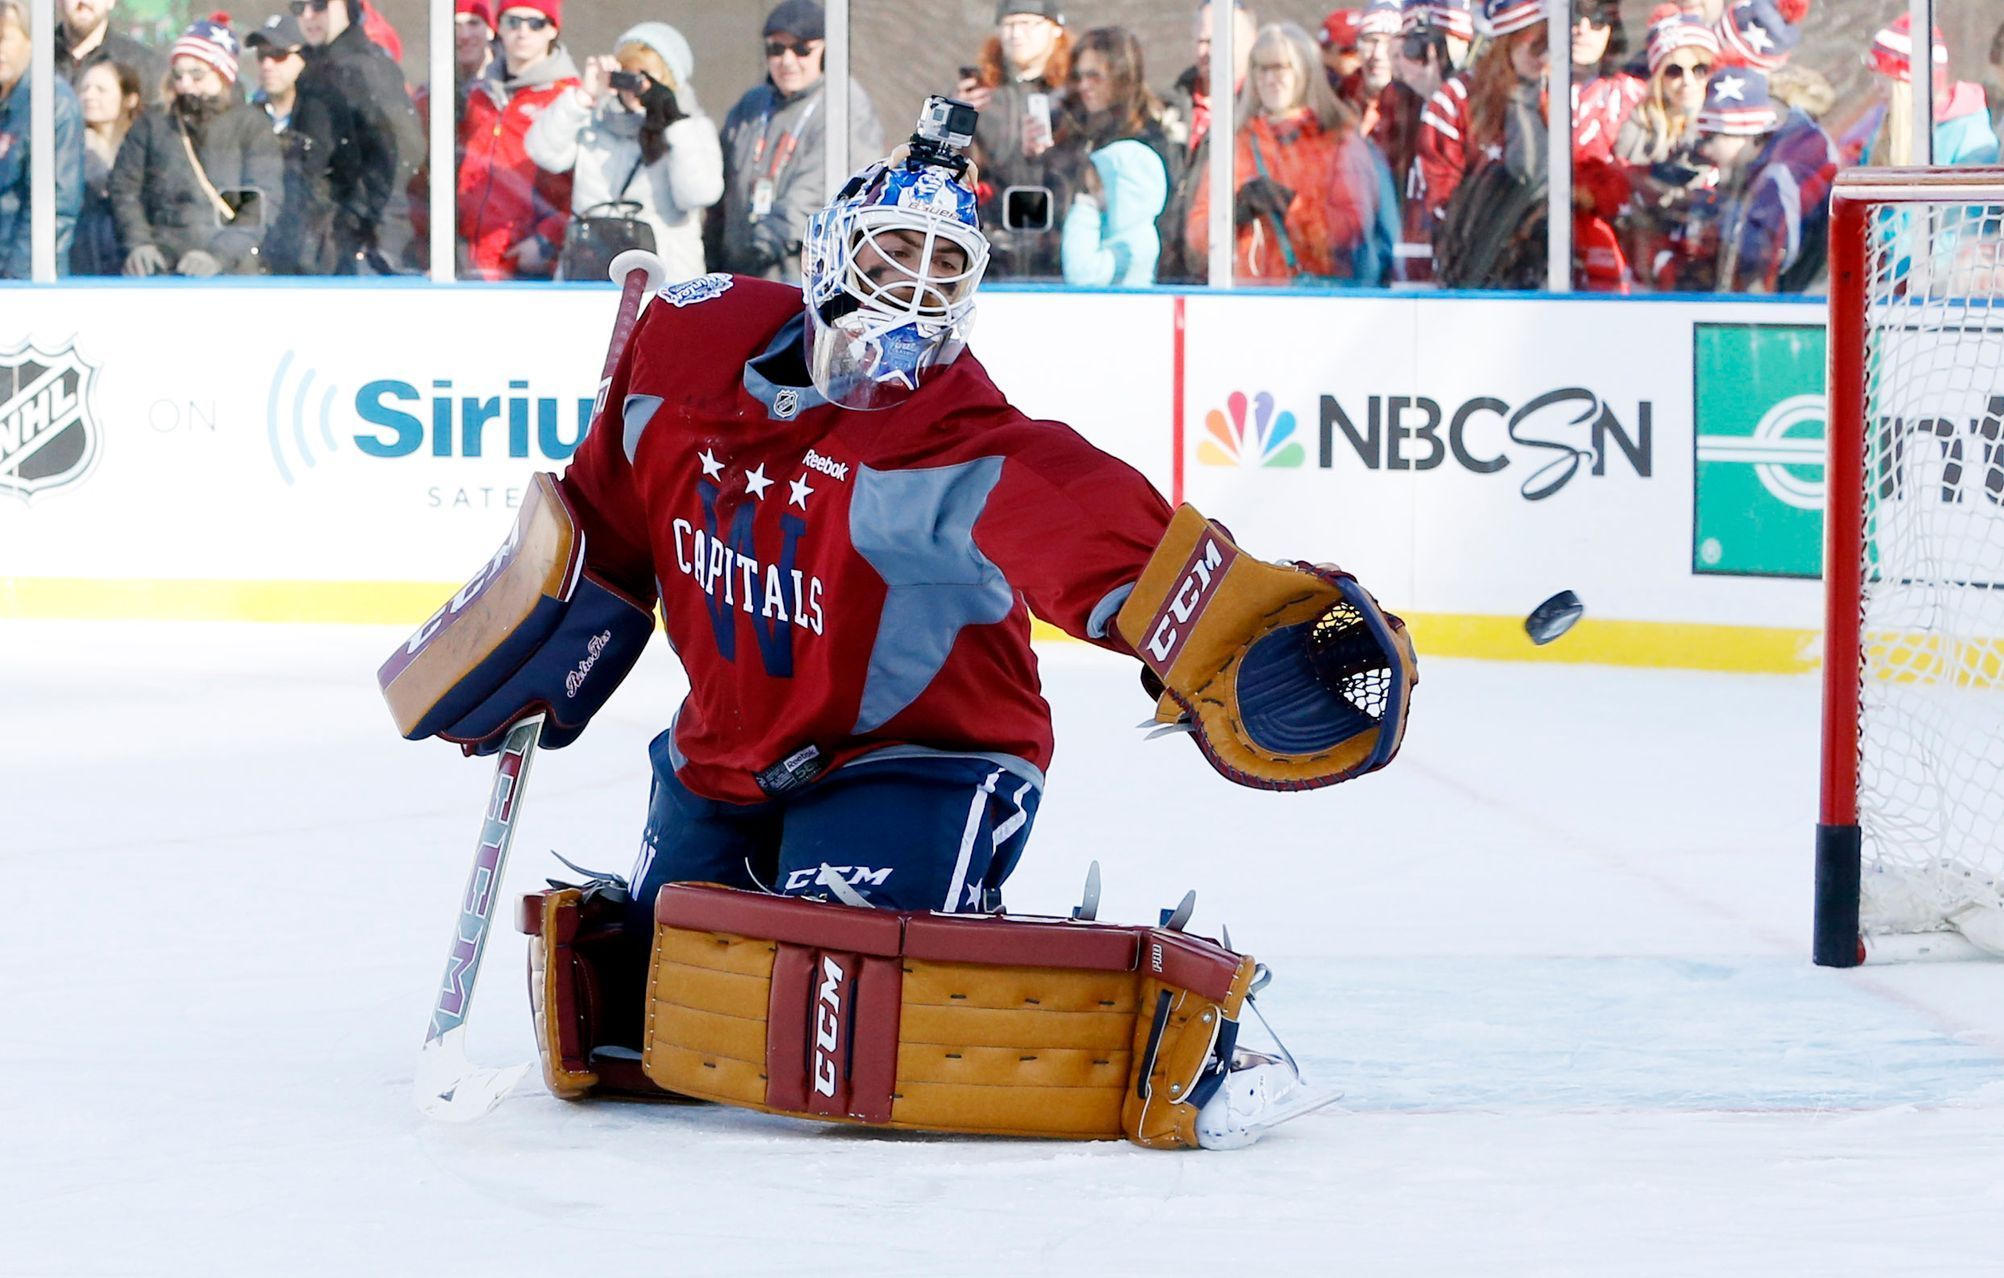 NHL: Winter Classic 2015 (Braden Holtby)